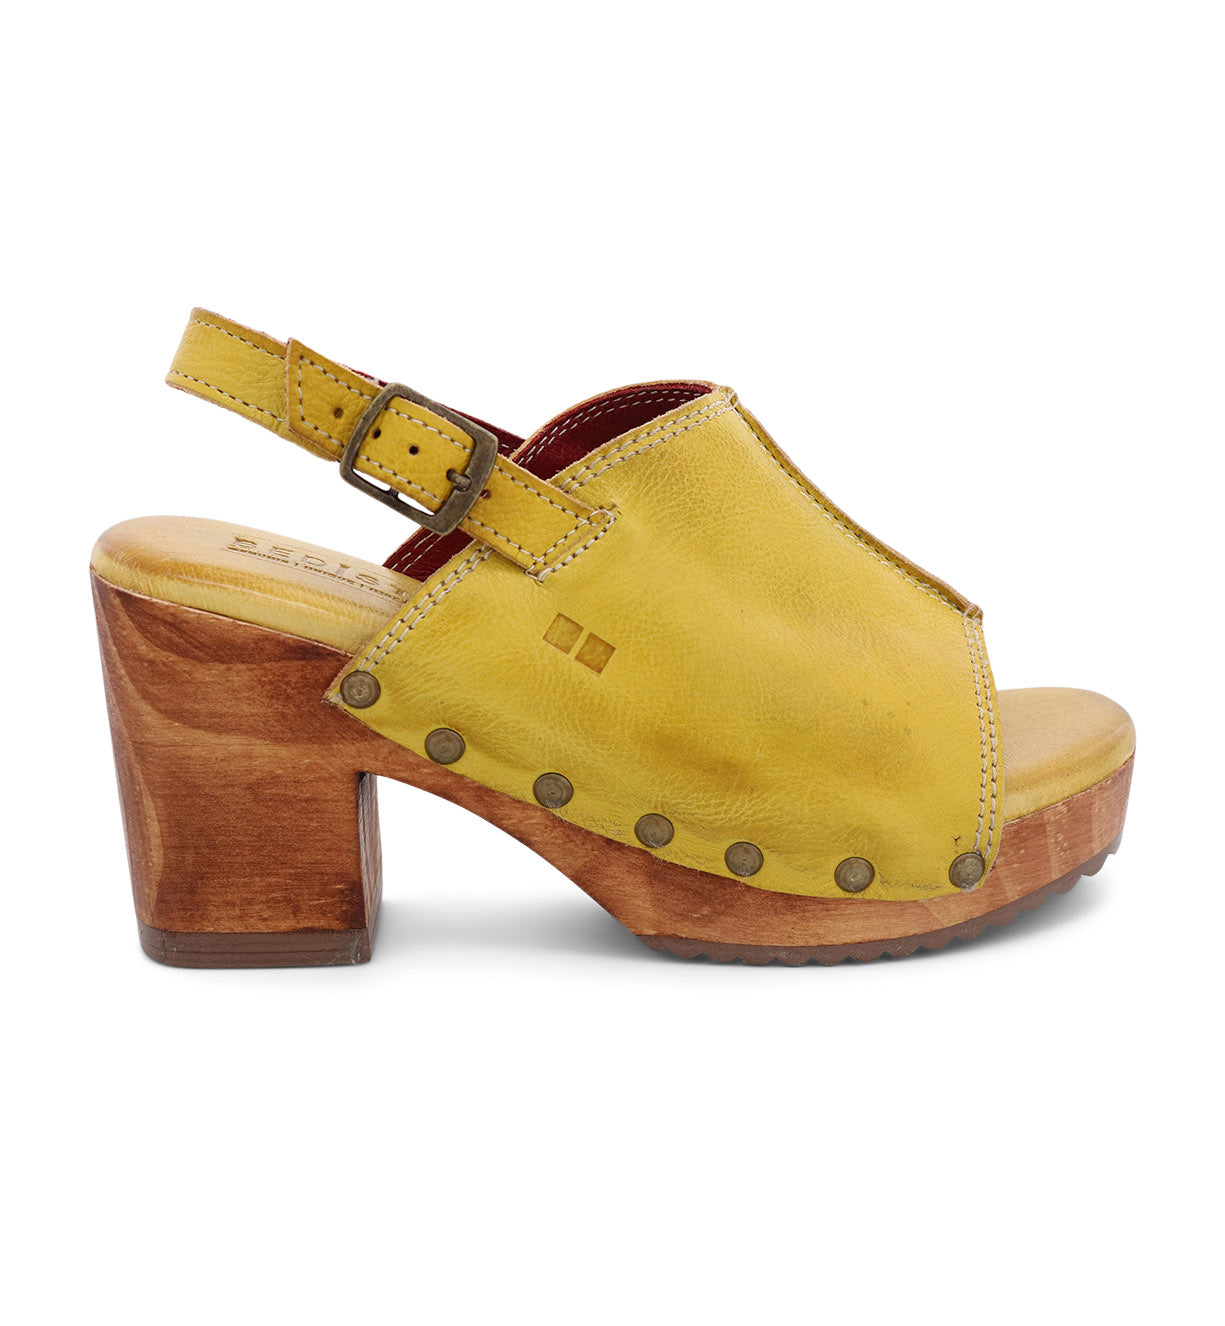 A women's yellow sandal with wooden heel.